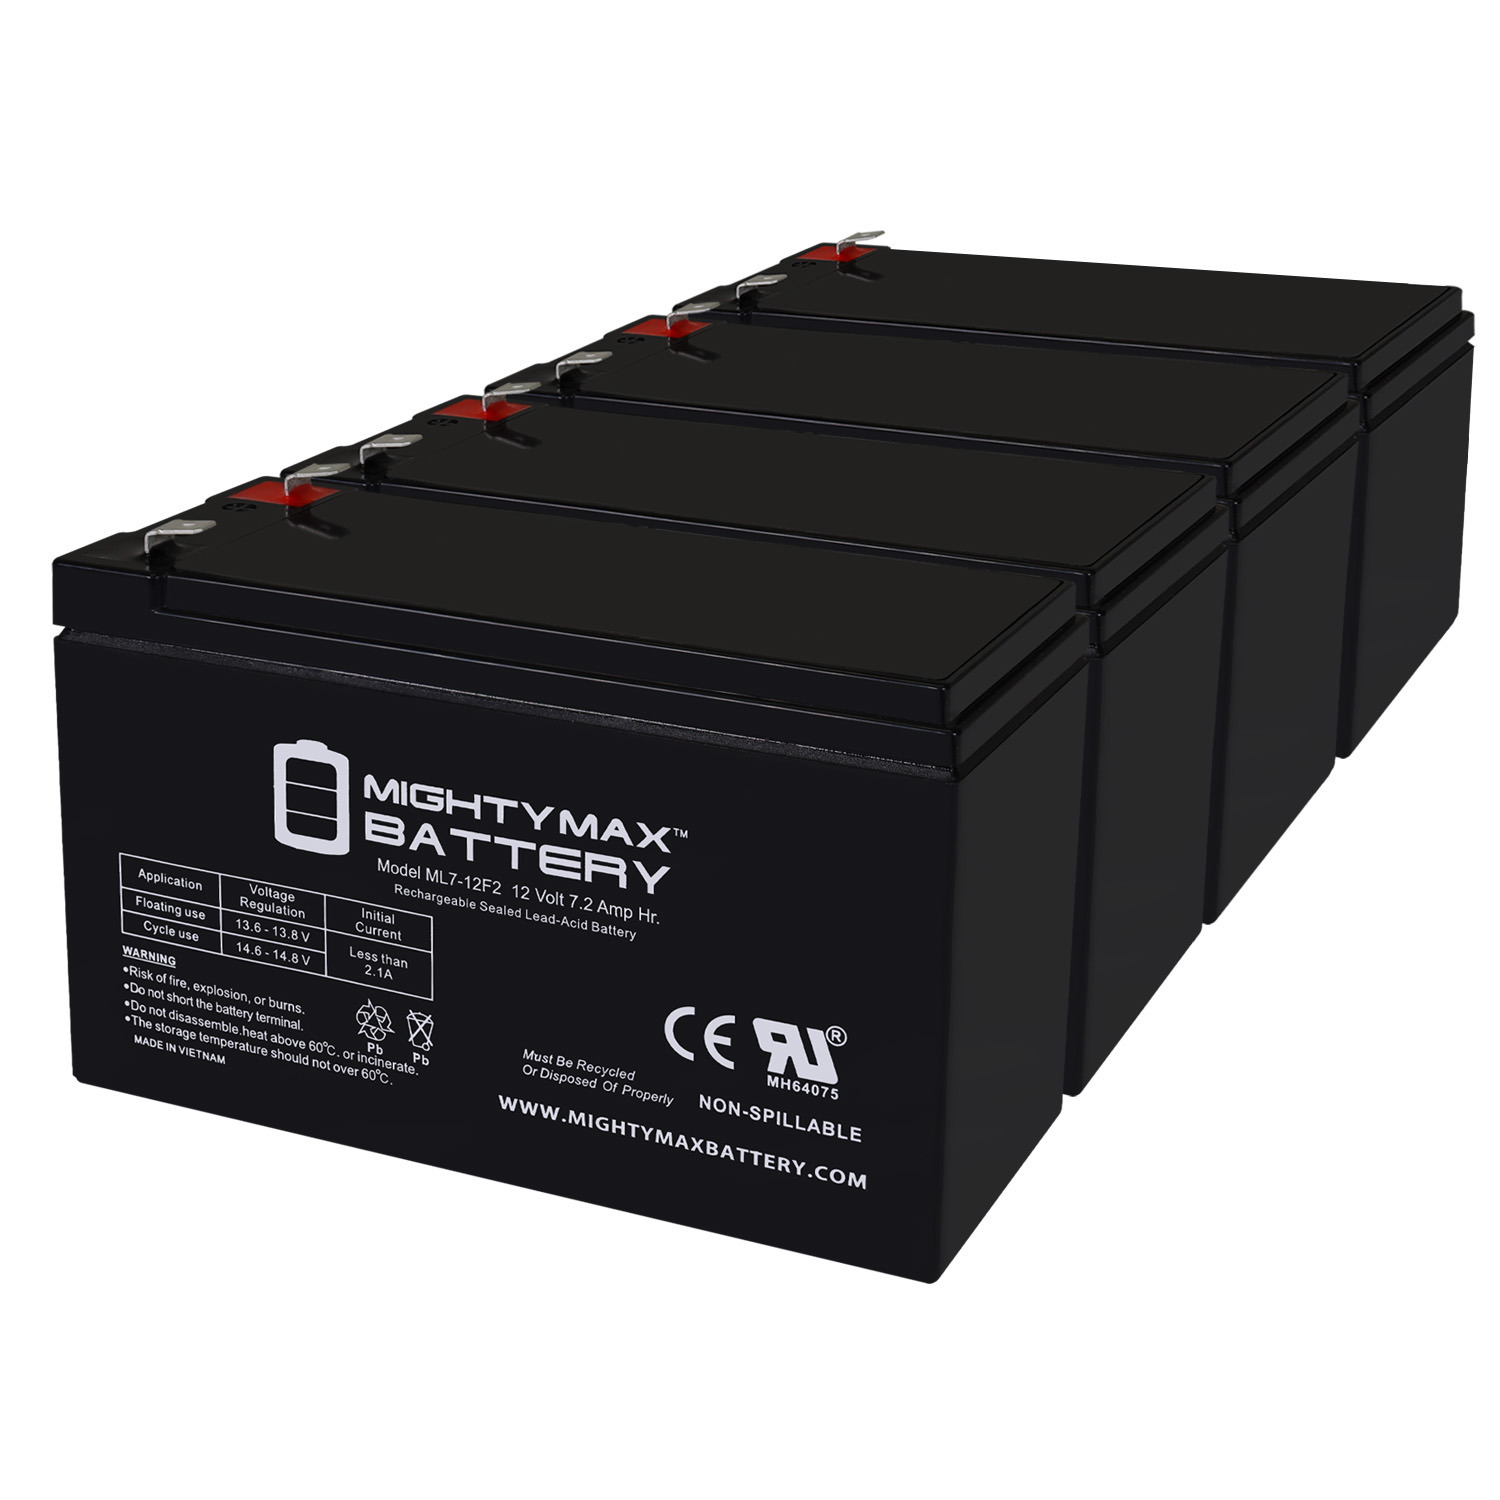 12V 7Ah F2 Replacement Battery for Belkin F6B750-AVR - 4 Pack